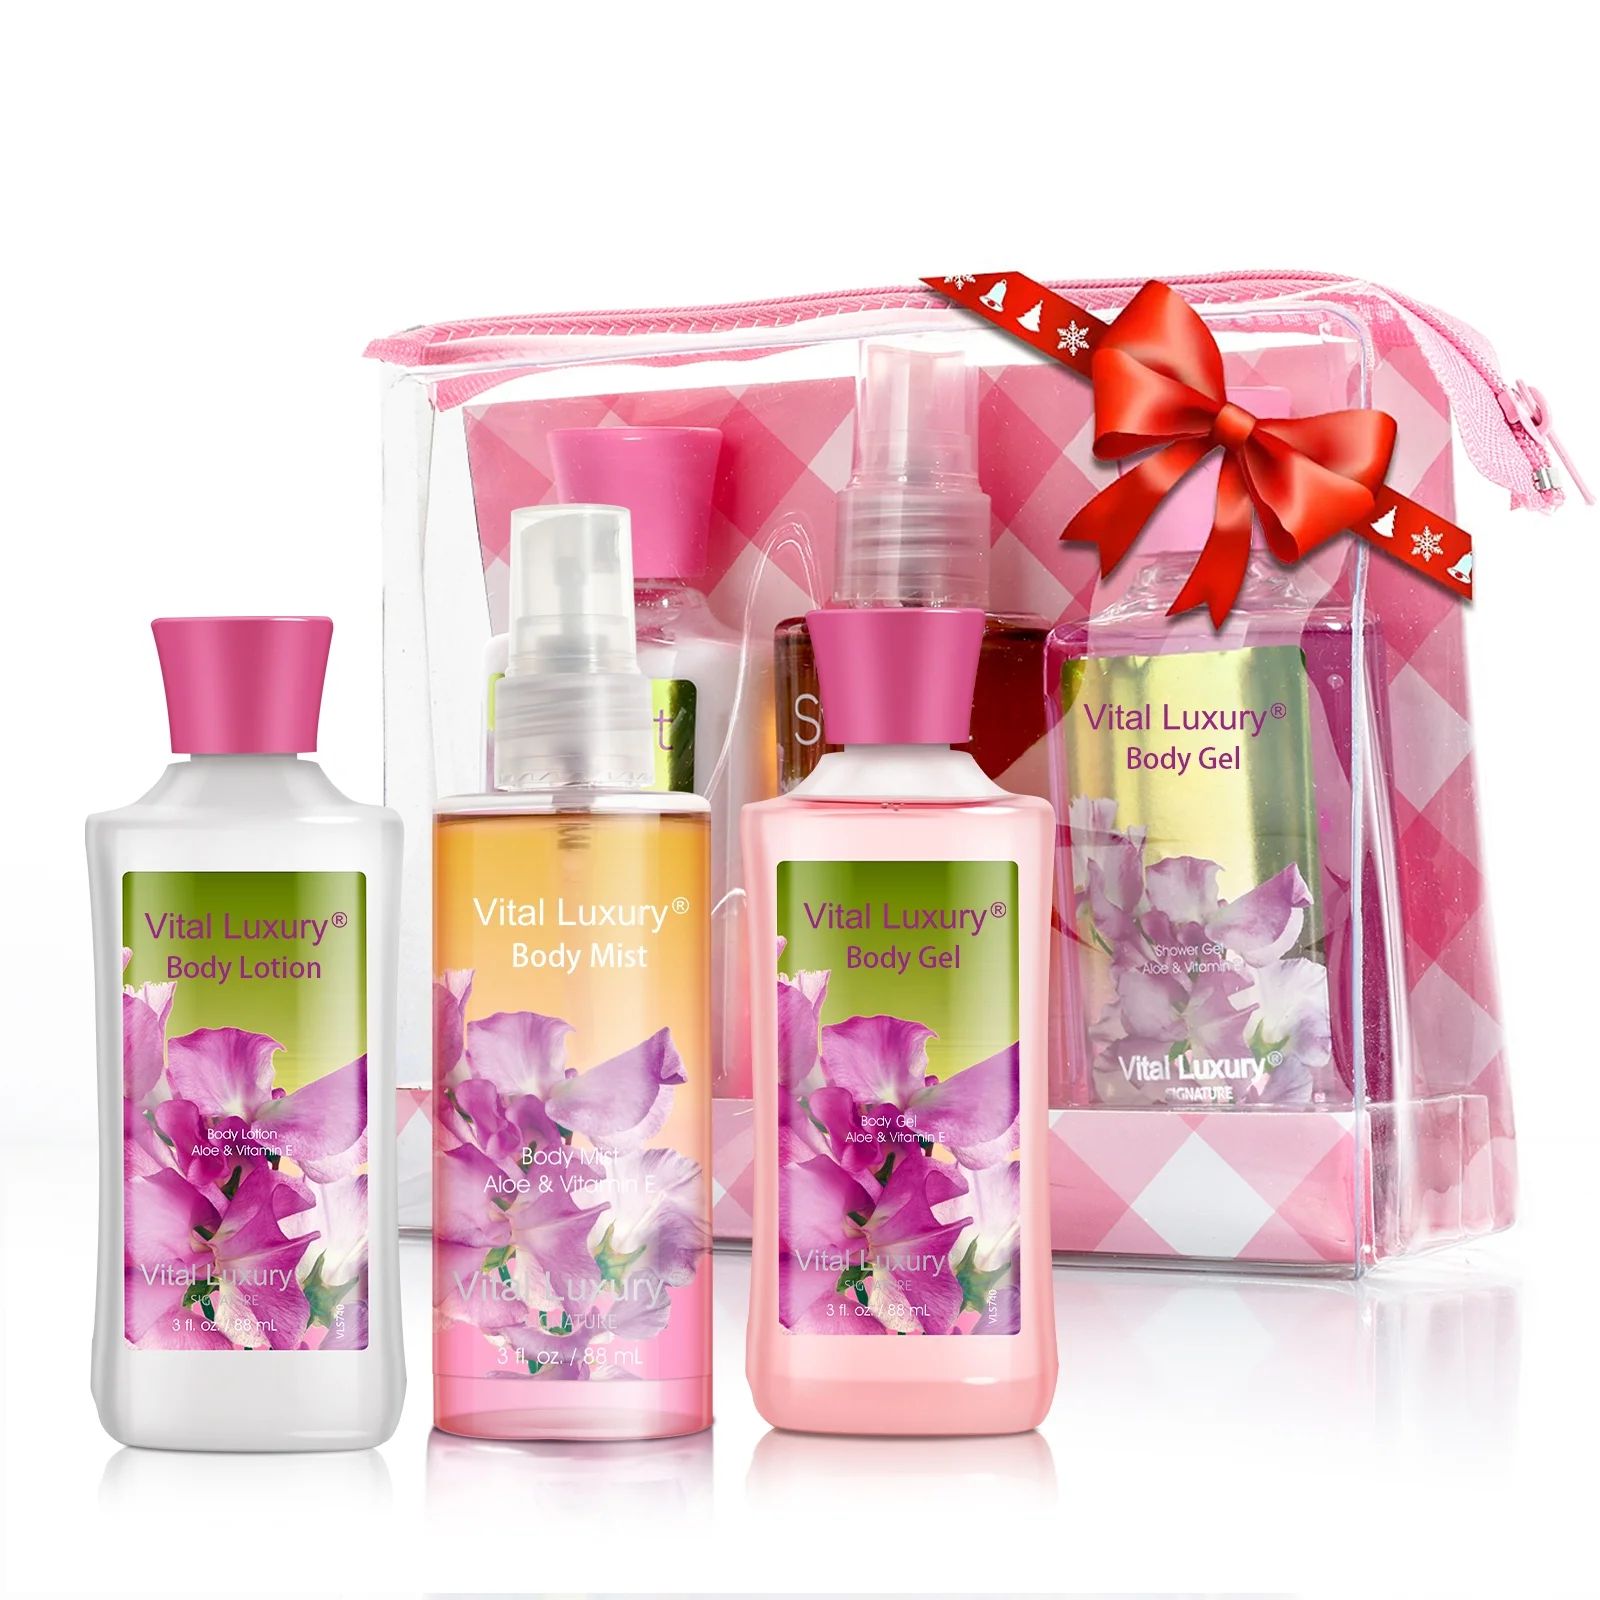 Vital Luxury Bath & Body Care Gift Travel Set - with Body Lotion, Shower Gel and Fragrance Mist, ... | Walmart (US)